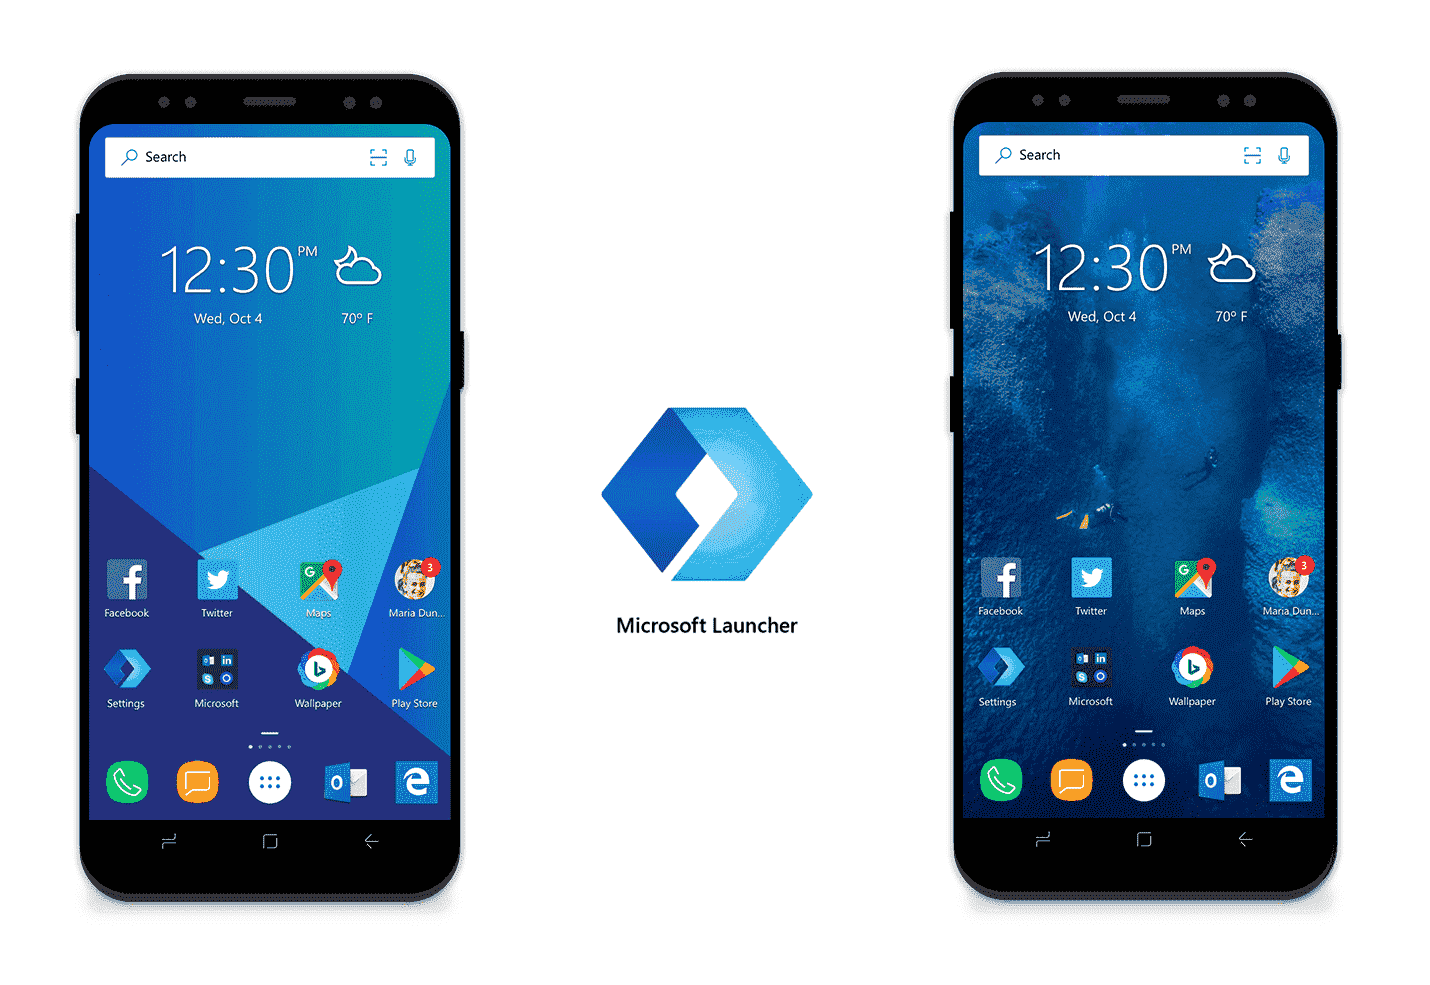 New Microsoft Launcher 5.0.1.46982 version for Android - November 5 f8d914f0746fe7594075d0b98171885f.png